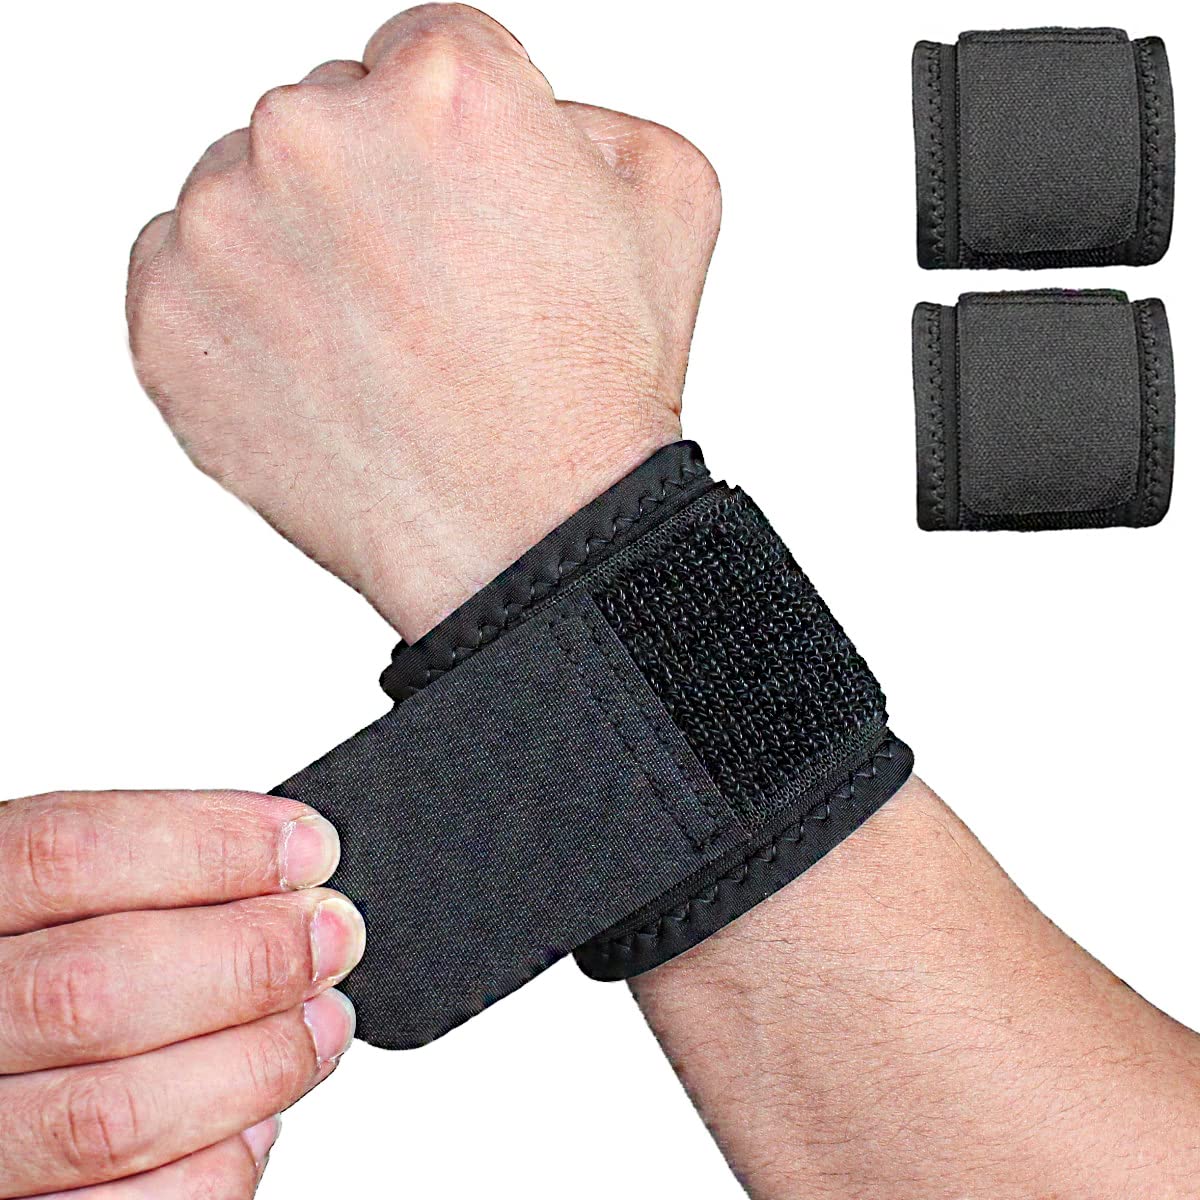 2 Pack Wrist Brace Adjustable Wrist Support Wrist Straps for Fitness Weightlifting, Tendonitis, Carpal Tunnel Arthritis, Wrist Wraps Wrist Pain Relief Highly Elastic